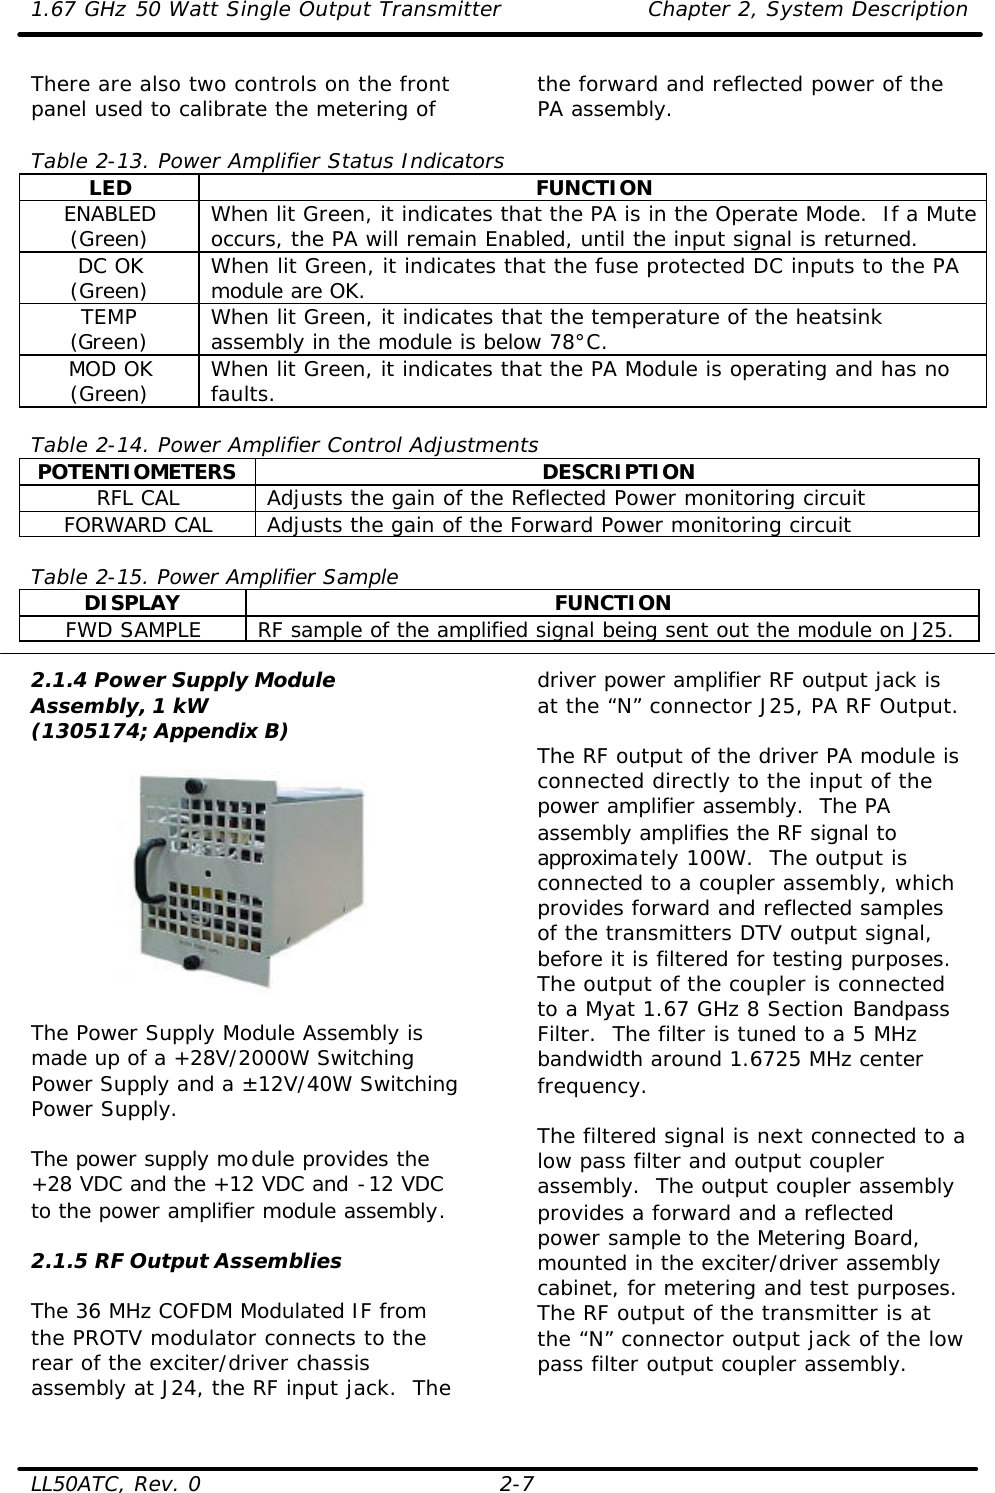 1.67 GHz 50 Watt Single Output Transmitter Chapter 2, System Description  LL50ATC, Rev. 0 2-7 There are also two controls on the front panel used to calibrate the metering of  the forward and reflected power of the PA assembly.    Table 2-13. Power Amplifier Status Indicators LED FUNCTION ENABLED (Green) When lit Green, it indicates that the PA is in the Operate Mode.  If a Mute occurs, the PA will remain Enabled, until the input signal is returned. DC OK (Green) When lit Green, it indicates that the fuse protected DC inputs to the PA module are OK. TEMP (Green) When lit Green, it indicates that the temperature of the heatsink assembly in the module is below 78°C. MOD OK (Green) When lit Green, it indicates that the PA Module is operating and has no faults.  Table 2-14. Power Amplifier Control Adjustments POTENTIOMETERS DESCRIPTION RFL CAL Adjusts the gain of the Reflected Power monitoring circuit FORWARD CAL Adjusts the gain of the Forward Power monitoring circuit  Table 2-15. Power Amplifier Sample DISPLAY FUNCTION FWD SAMPLE RF sample of the amplified signal being sent out the module on J25.  2.1.4 Power Supply Module Assembly, 1 kW (1305174; Appendix B)    The Power Supply Module Assembly is made up of a +28V/2000W Switching Power Supply and a ±12V/40W Switching Power Supply.   The power supply module provides the +28 VDC and the +12 VDC and -12 VDC to the power amplifier module assembly.  2.1.5 RF Output Assemblies  The 36 MHz COFDM Modulated IF from the PROTV modulator connects to the rear of the exciter/driver chassis assembly at J24, the RF input jack.  The driver power amplifier RF output jack is at the “N” connector J25, PA RF Output.   The RF output of the driver PA module is connected directly to the input of the power amplifier assembly.  The PA assembly amplifies the RF signal to approximately 100W.  The output is connected to a coupler assembly, which provides forward and reflected samples of the transmitters DTV output signal, before it is filtered for testing purposes.  The output of the coupler is connected to a Myat 1.67 GHz 8 Section Bandpass Filter.  The filter is tuned to a 5 MHz bandwidth around 1.6725 MHz center frequency.  The filtered signal is next connected to a low pass filter and output coupler assembly.  The output coupler assembly provides a forward and a reflected power sample to the Metering Board, mounted in the exciter/driver assembly cabinet, for metering and test purposes.  The RF output of the transmitter is at the “N” connector output jack of the low pass filter output coupler assembly. 